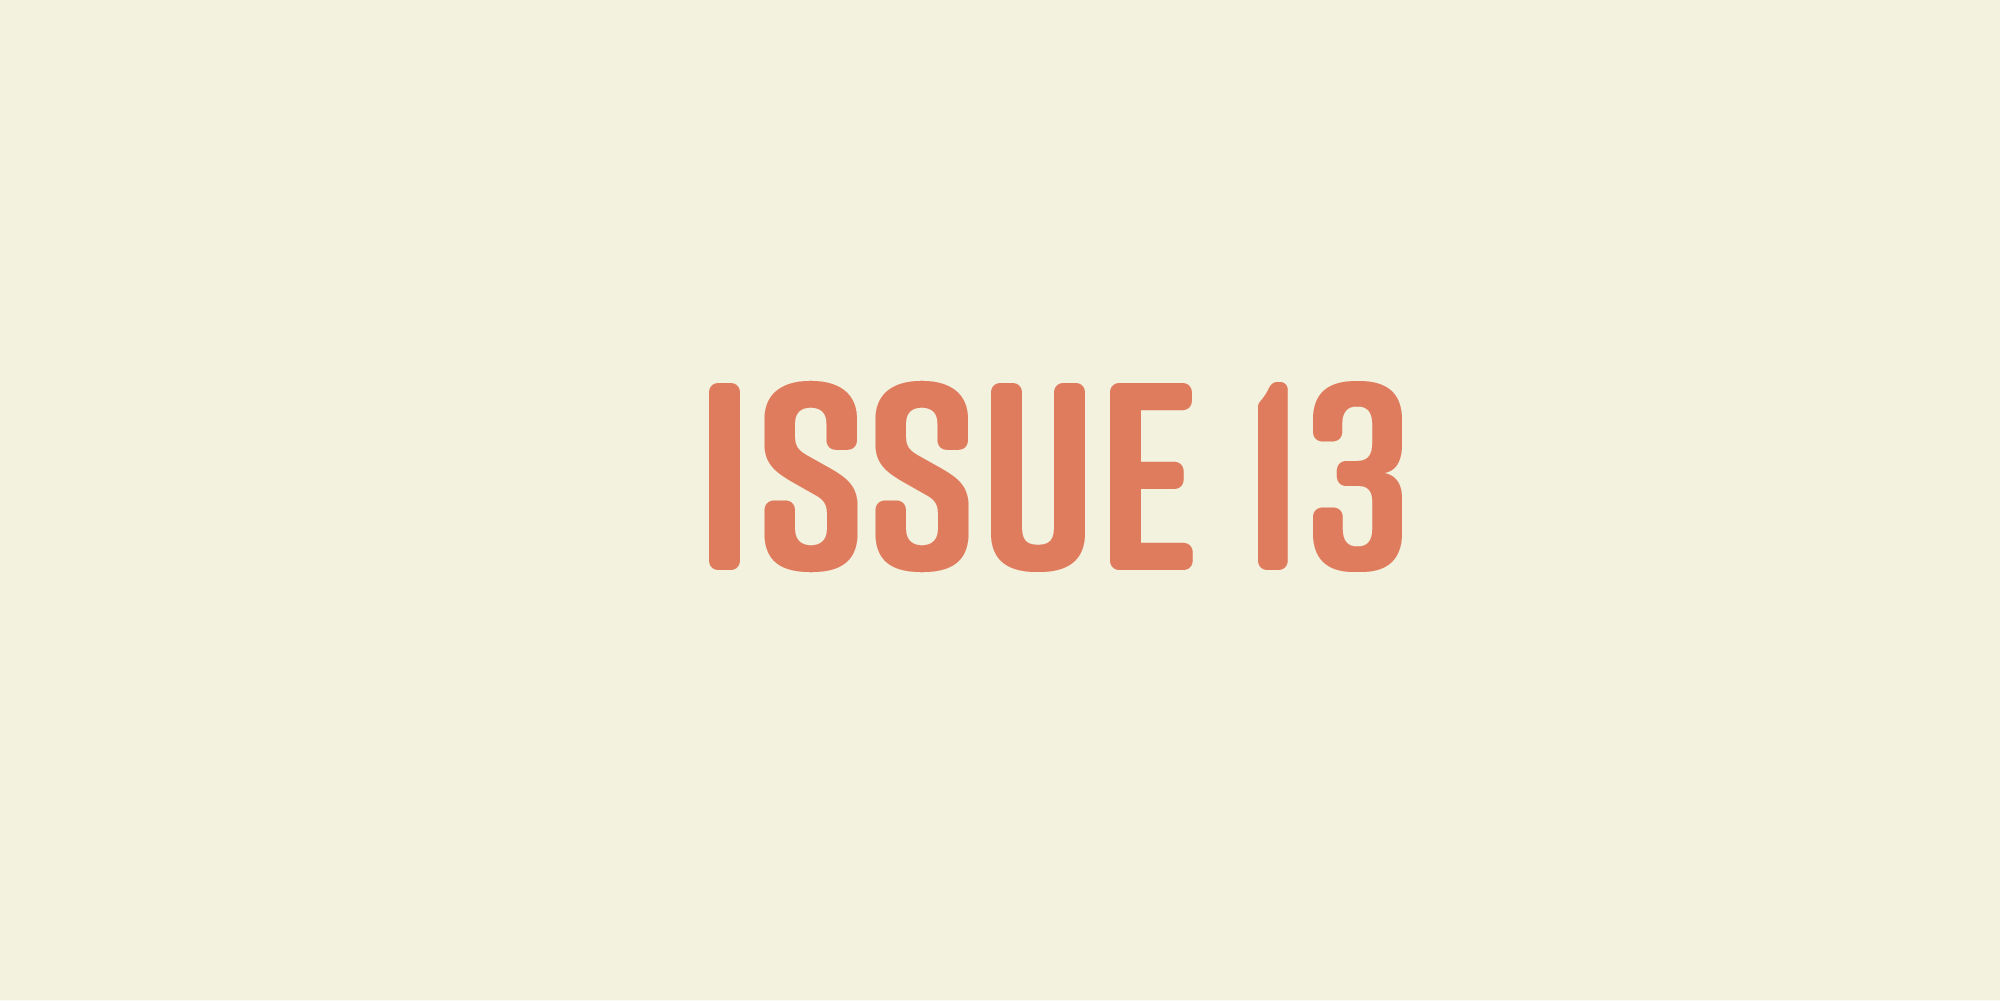 Issue 13